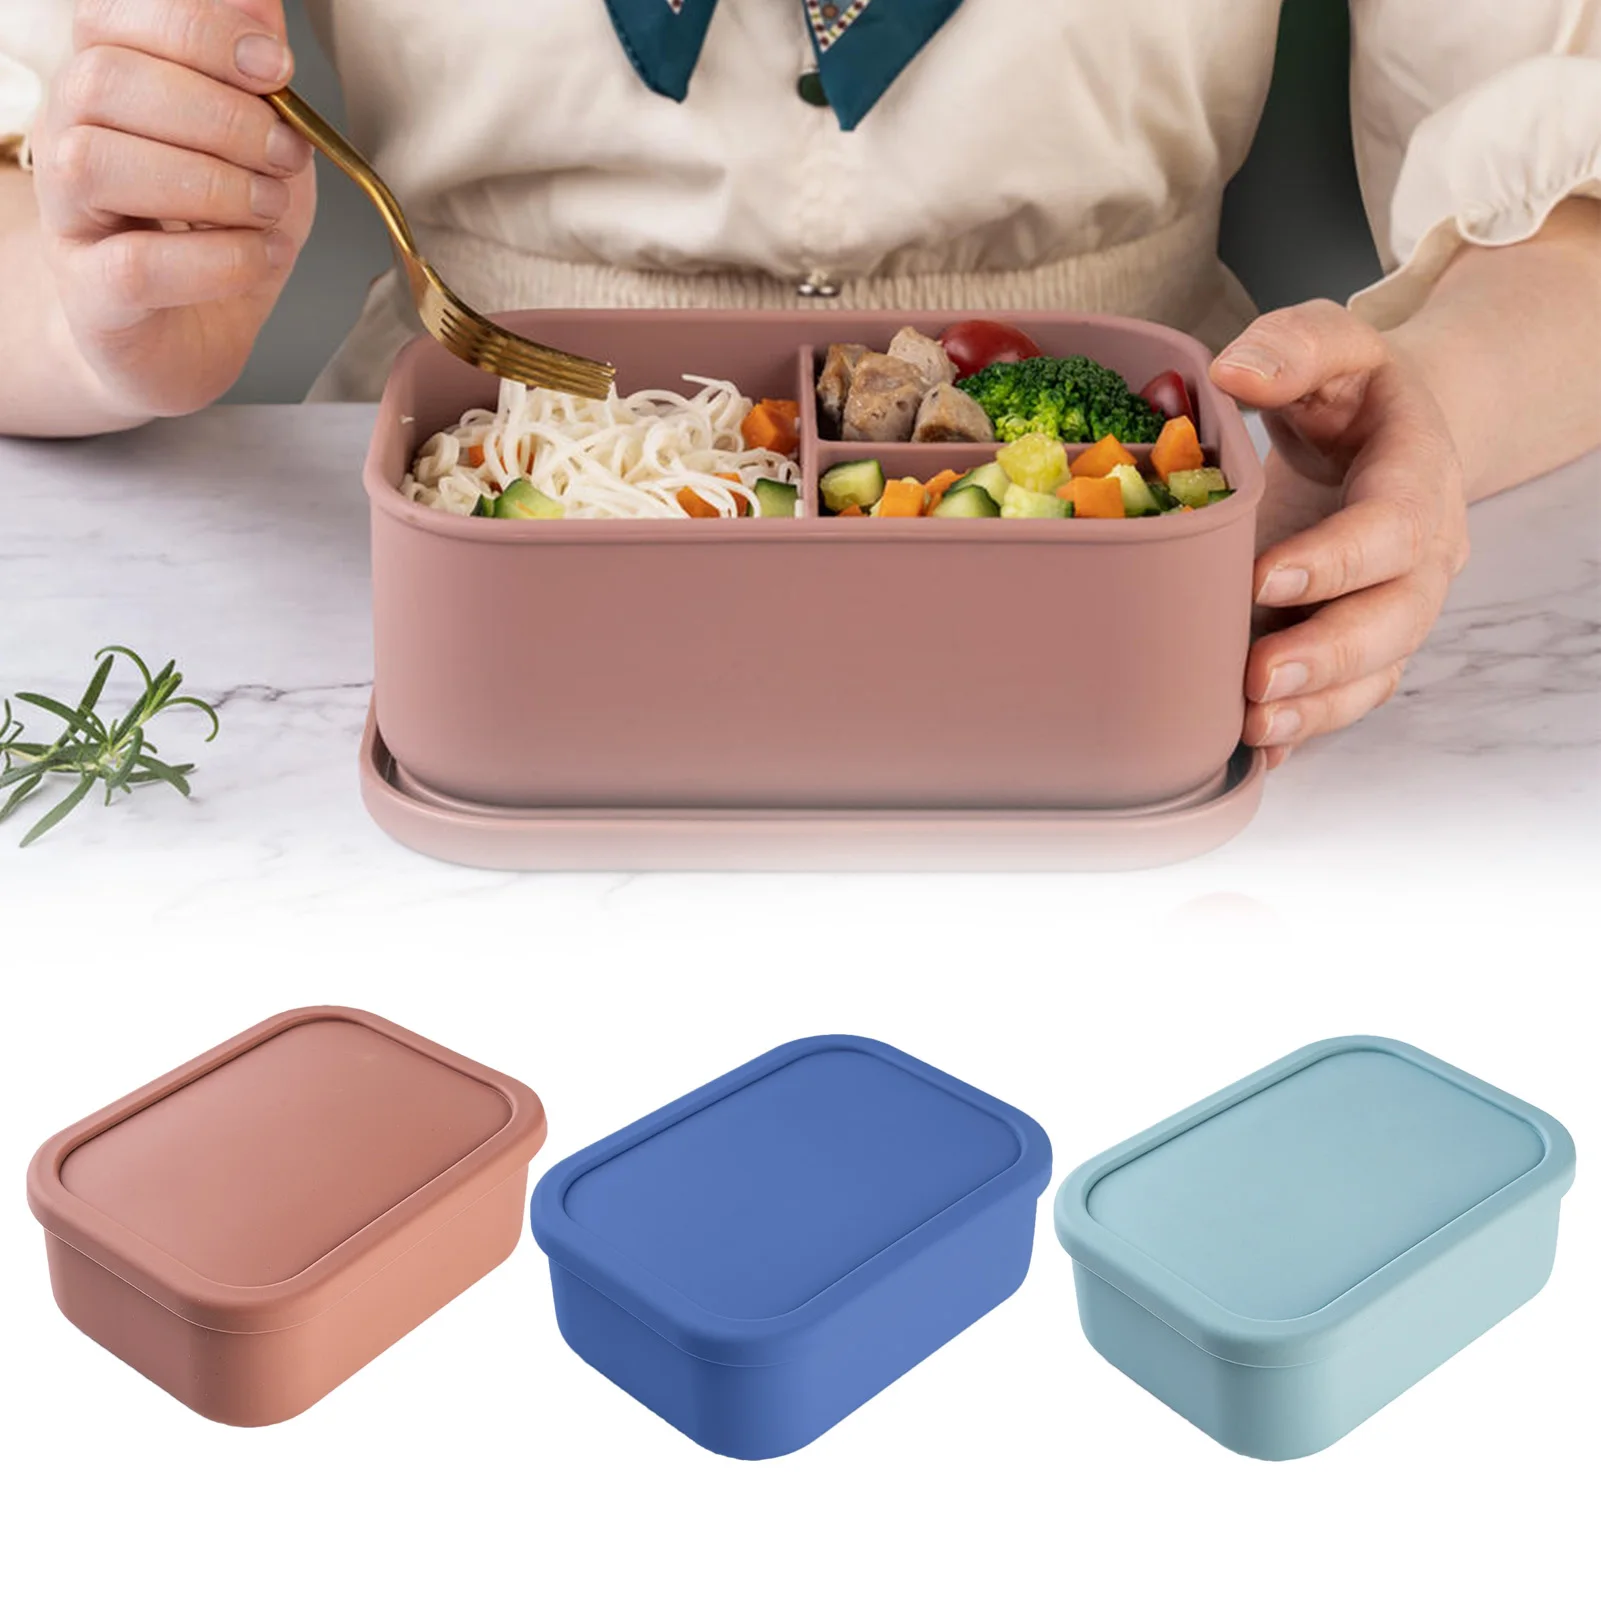 Silicone Bento Box Safe Lunch Containers With 3 Compartments Food Storage Lunch Box With Lid For Office Workers Students Adults